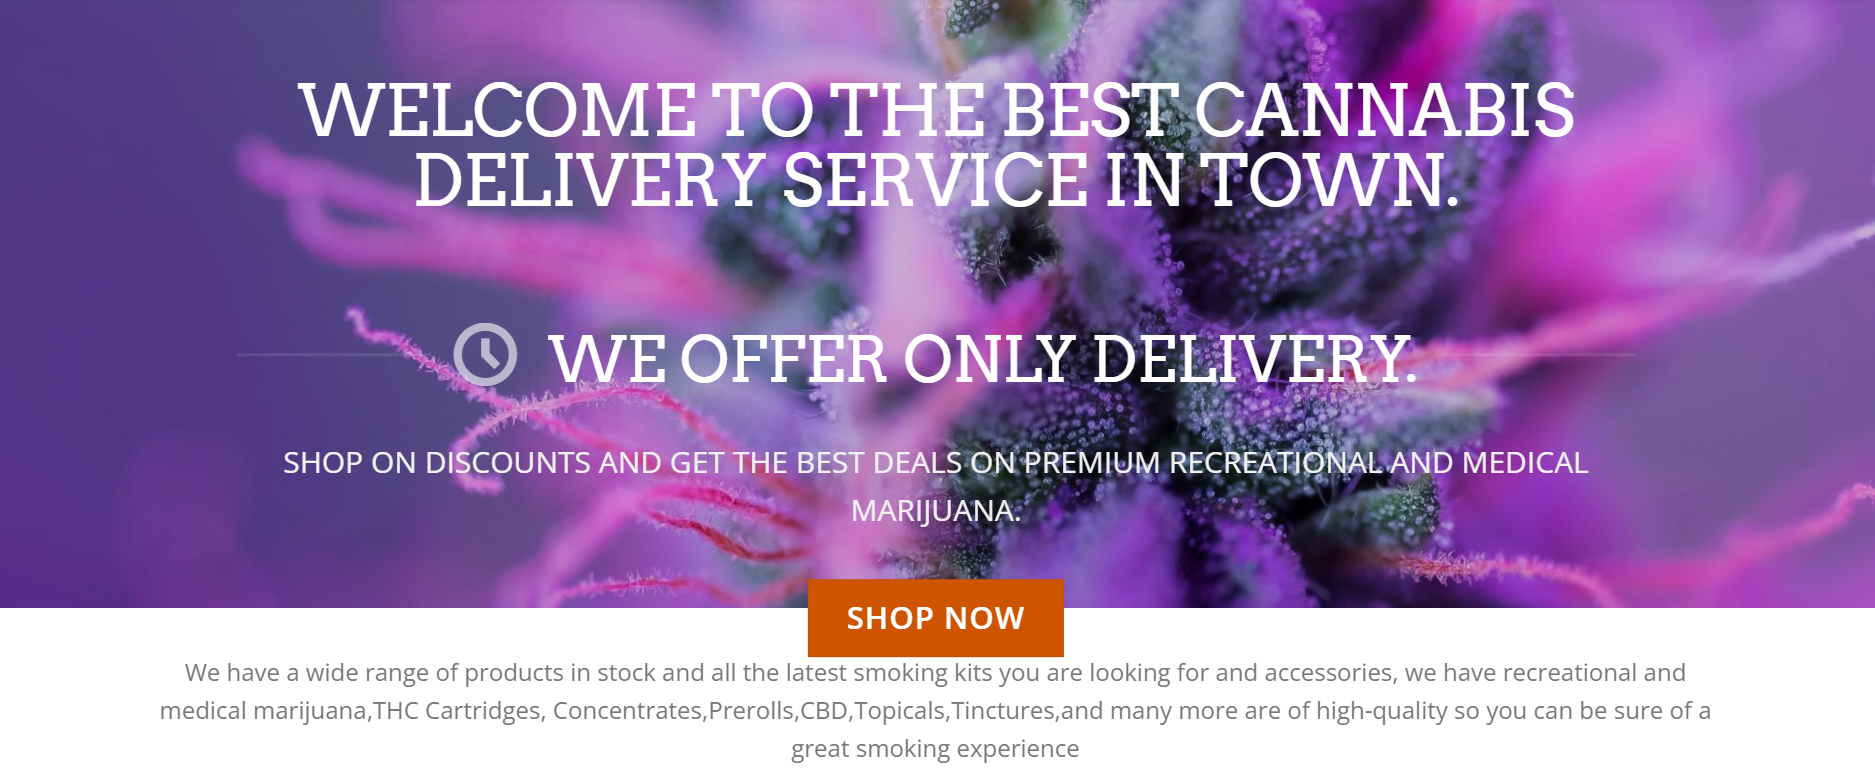 The homepage of Excellent Cannabis Delivery, a fake marijuana dispensary